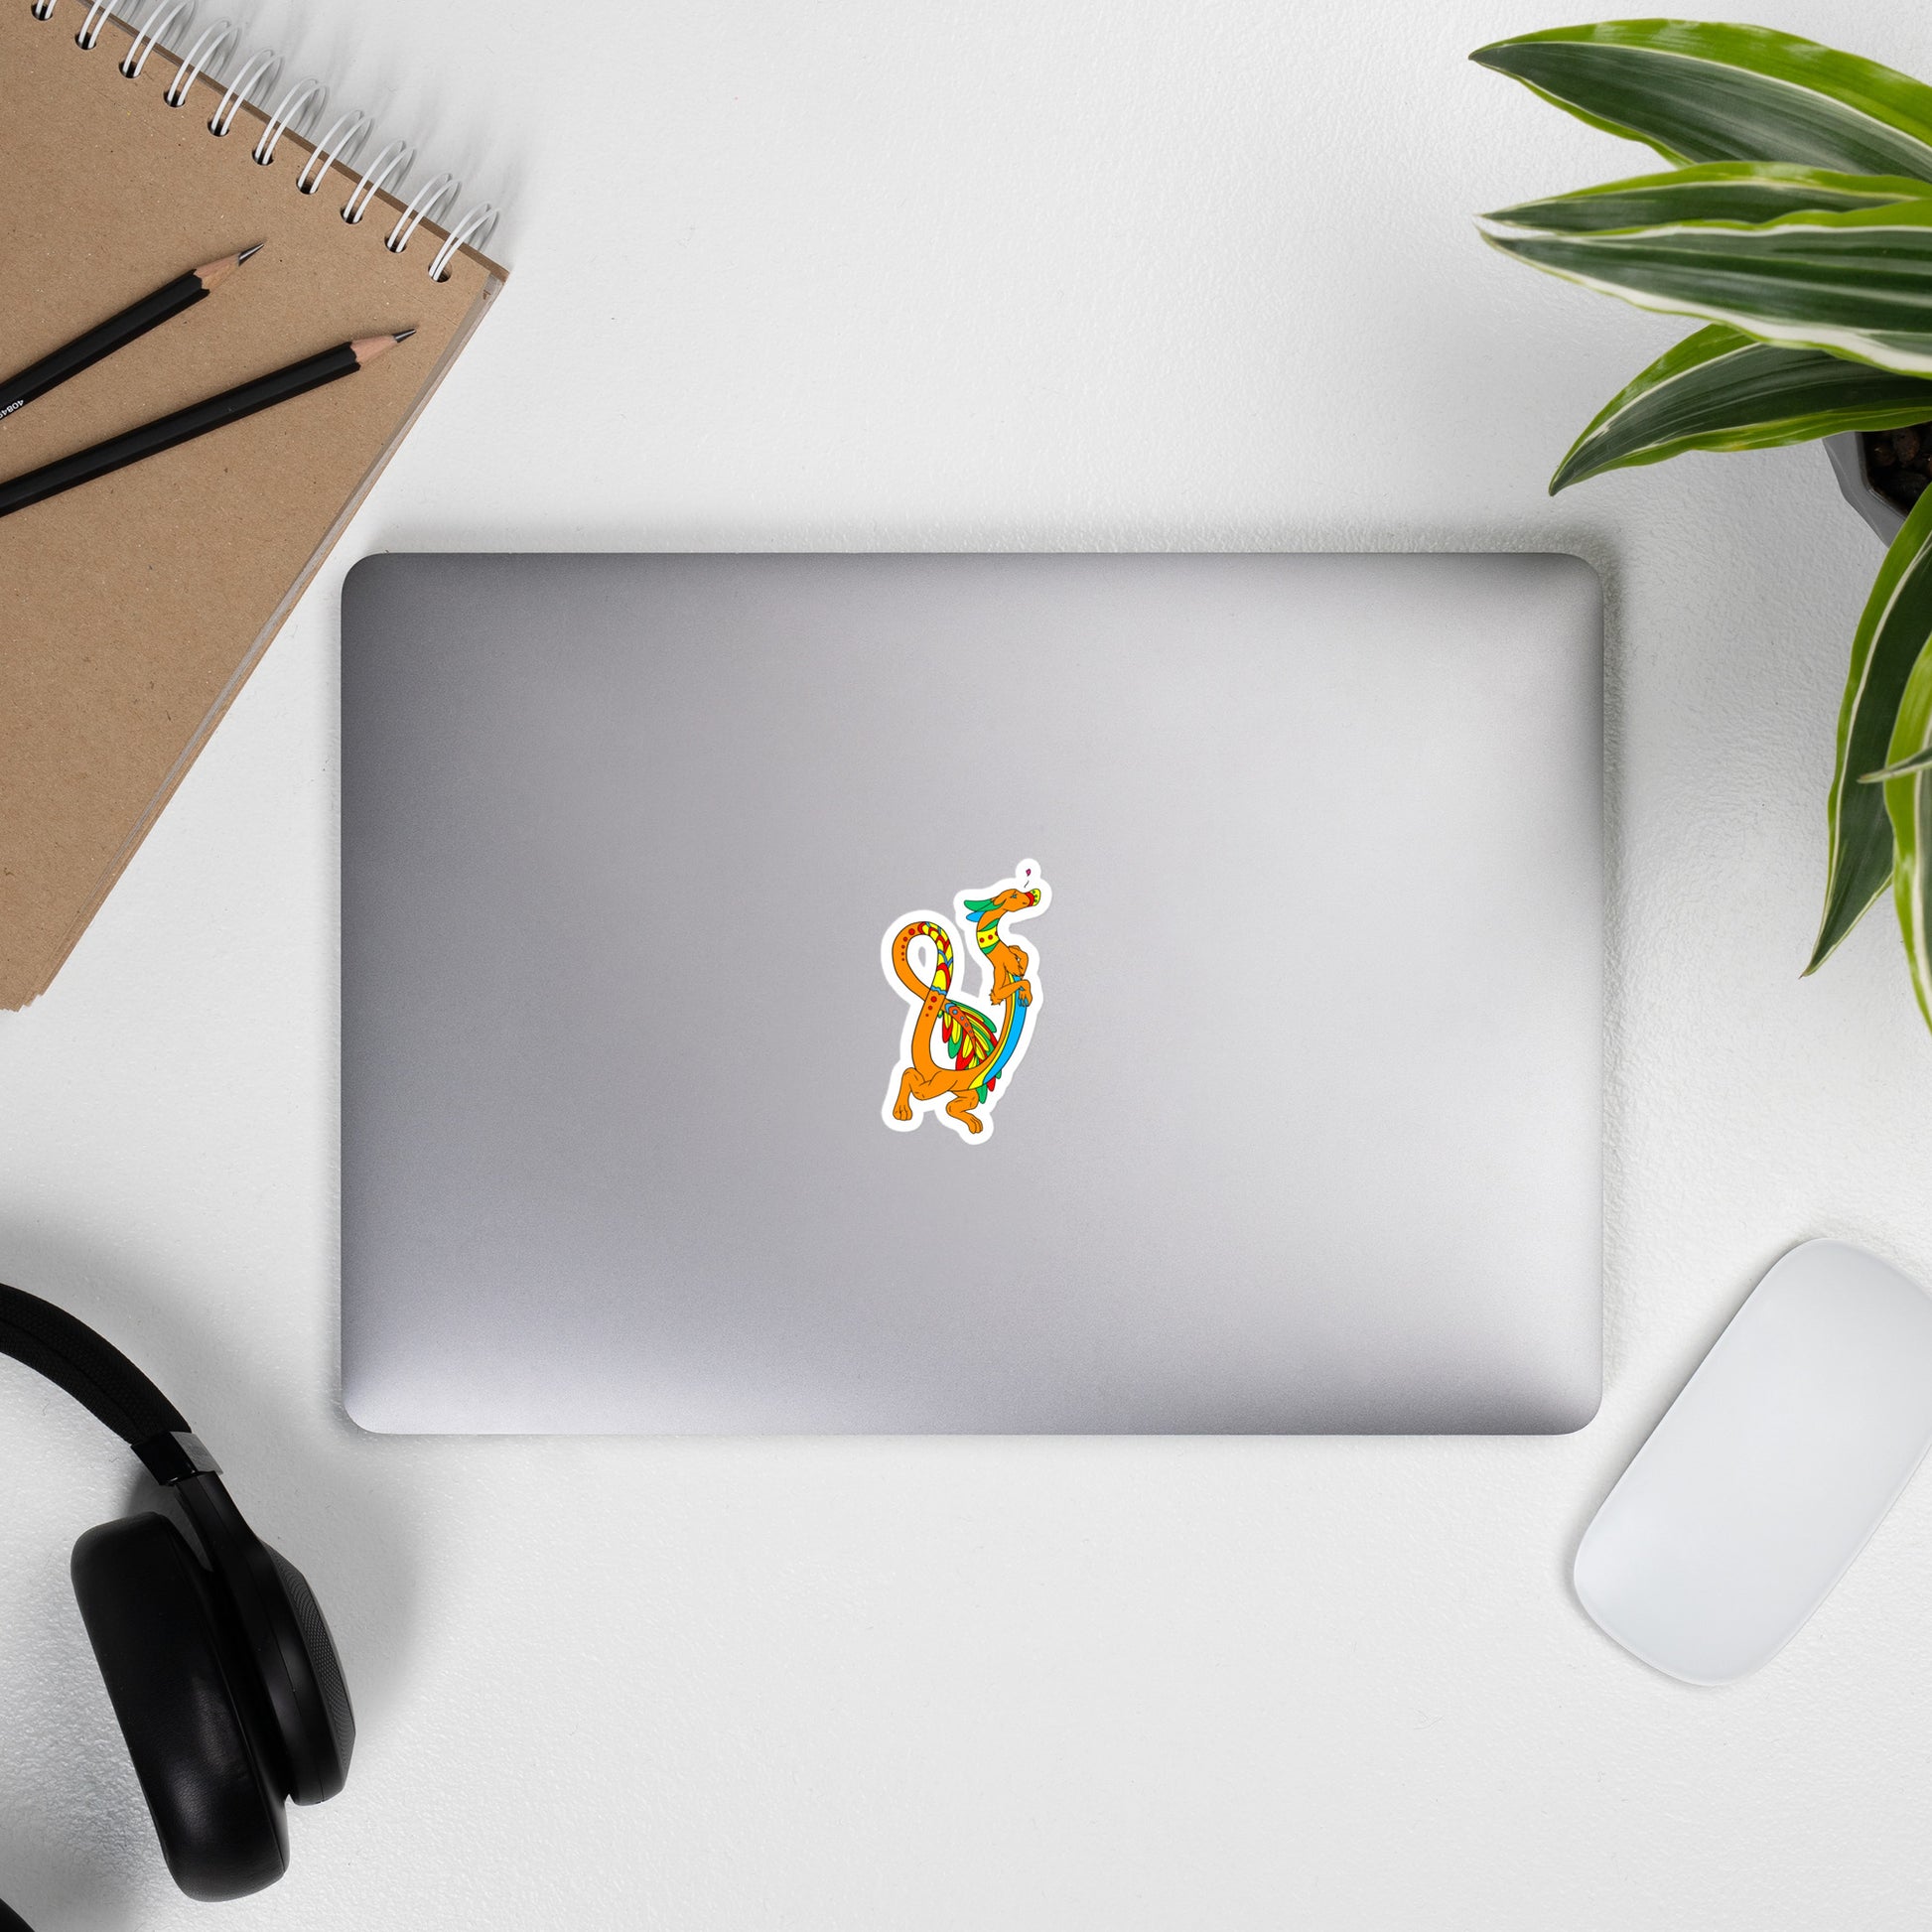 Domingo the Aztec Fuzzy Noodle Dragon. Original character design kiss-cut vinyl sticker with white border. 3 inches tall. Shown on a laptop.